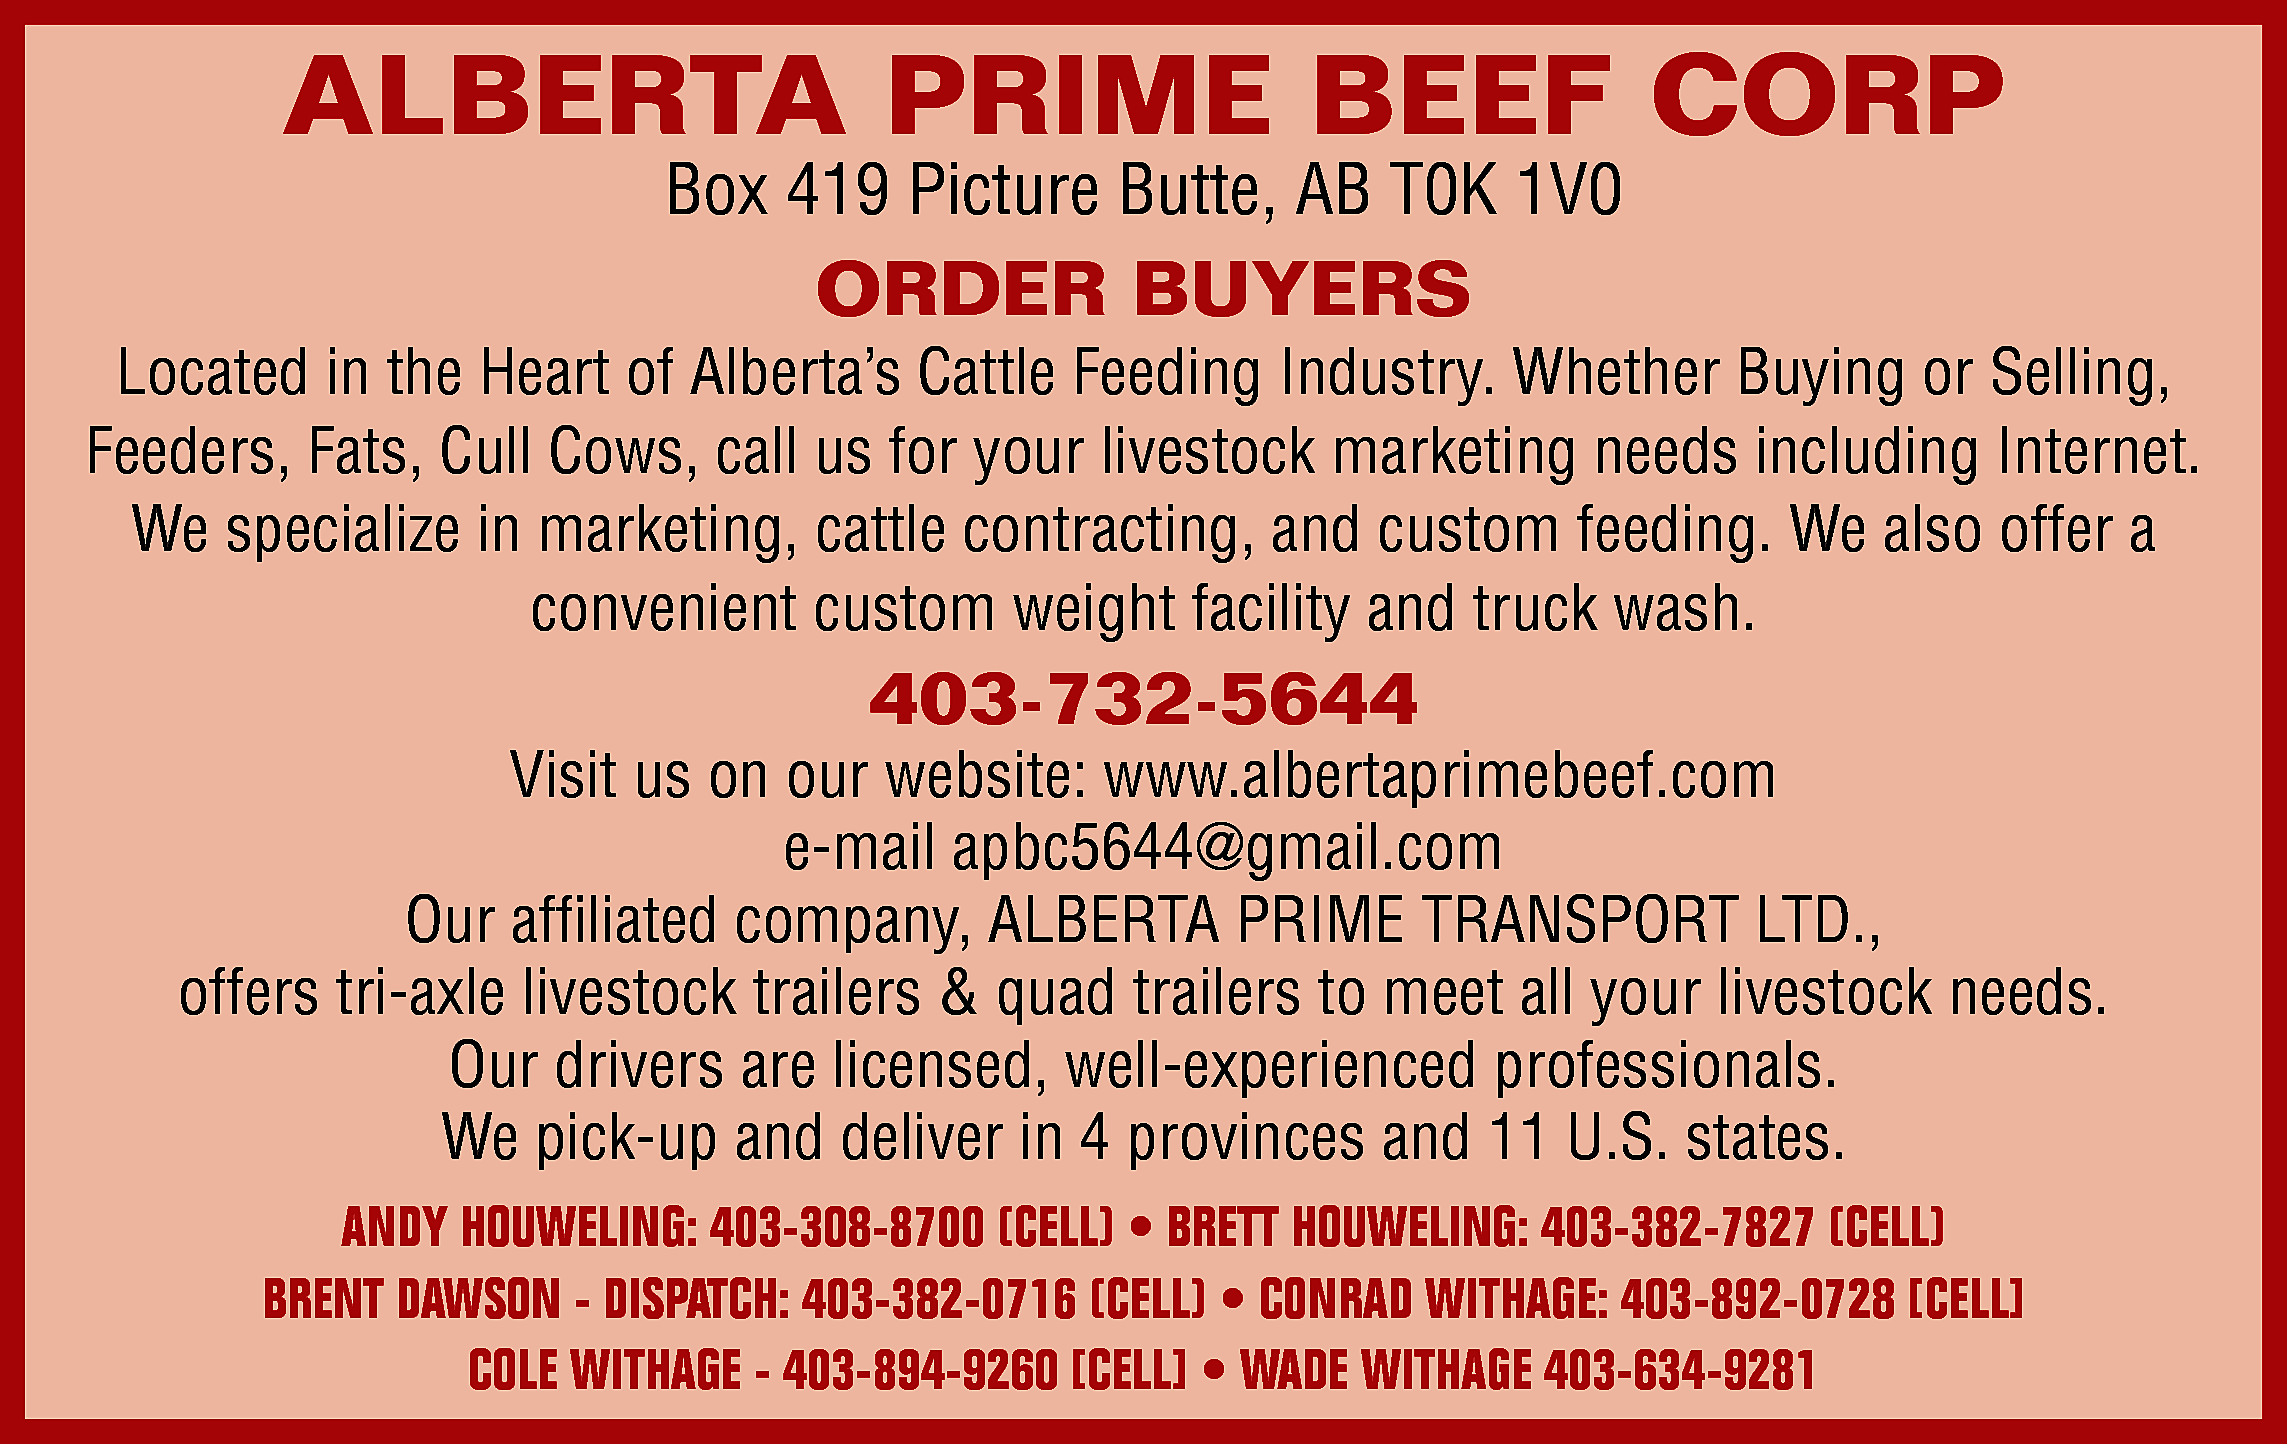 ALBERTA PRIME BEEF CORP <br>Box  ALBERTA PRIME BEEF CORP  Box 419 Picture Butte, AB T0K 1V0    ORDER BUYERS    Located in the Heart of Alberta’s Cattle Feeding Industry. Whether Buying or Selling,  Feeders, Fats, Cull Cows, call us for your livestock marketing needs including Internet.  We specialize in marketing, cattle contracting, and custom feeding. We also offer a  convenient custom weight facility and truck wash.    403-732-5644    Visit us on our website: www.albertaprimebeef.com  e-mail apbc5644@gmail.com  Our affiliated company, ALBERTA PRIME TRANSPORT LTD.,  offers tri-axle livestock trailers & quad trailers to meet all your livestock needs.  Our drivers are licensed, well-experienced professionals.  We pick-up and deliver in 4 provinces and 11 U.S. states.  ANDY HOUWELING: 403-308-8700 (CELL) • BRETT HOUWELING: 403-382-7827 (CELL)  BRENT DAWSON - DISPATCH: 403-382-0716 (CELL) • CONRAD WITHAGE: 403-892-0728 [CELL]  COLE WITHAGE - 403-894-9260 [CELL] • WADE WITHAGE 403-634-9281    